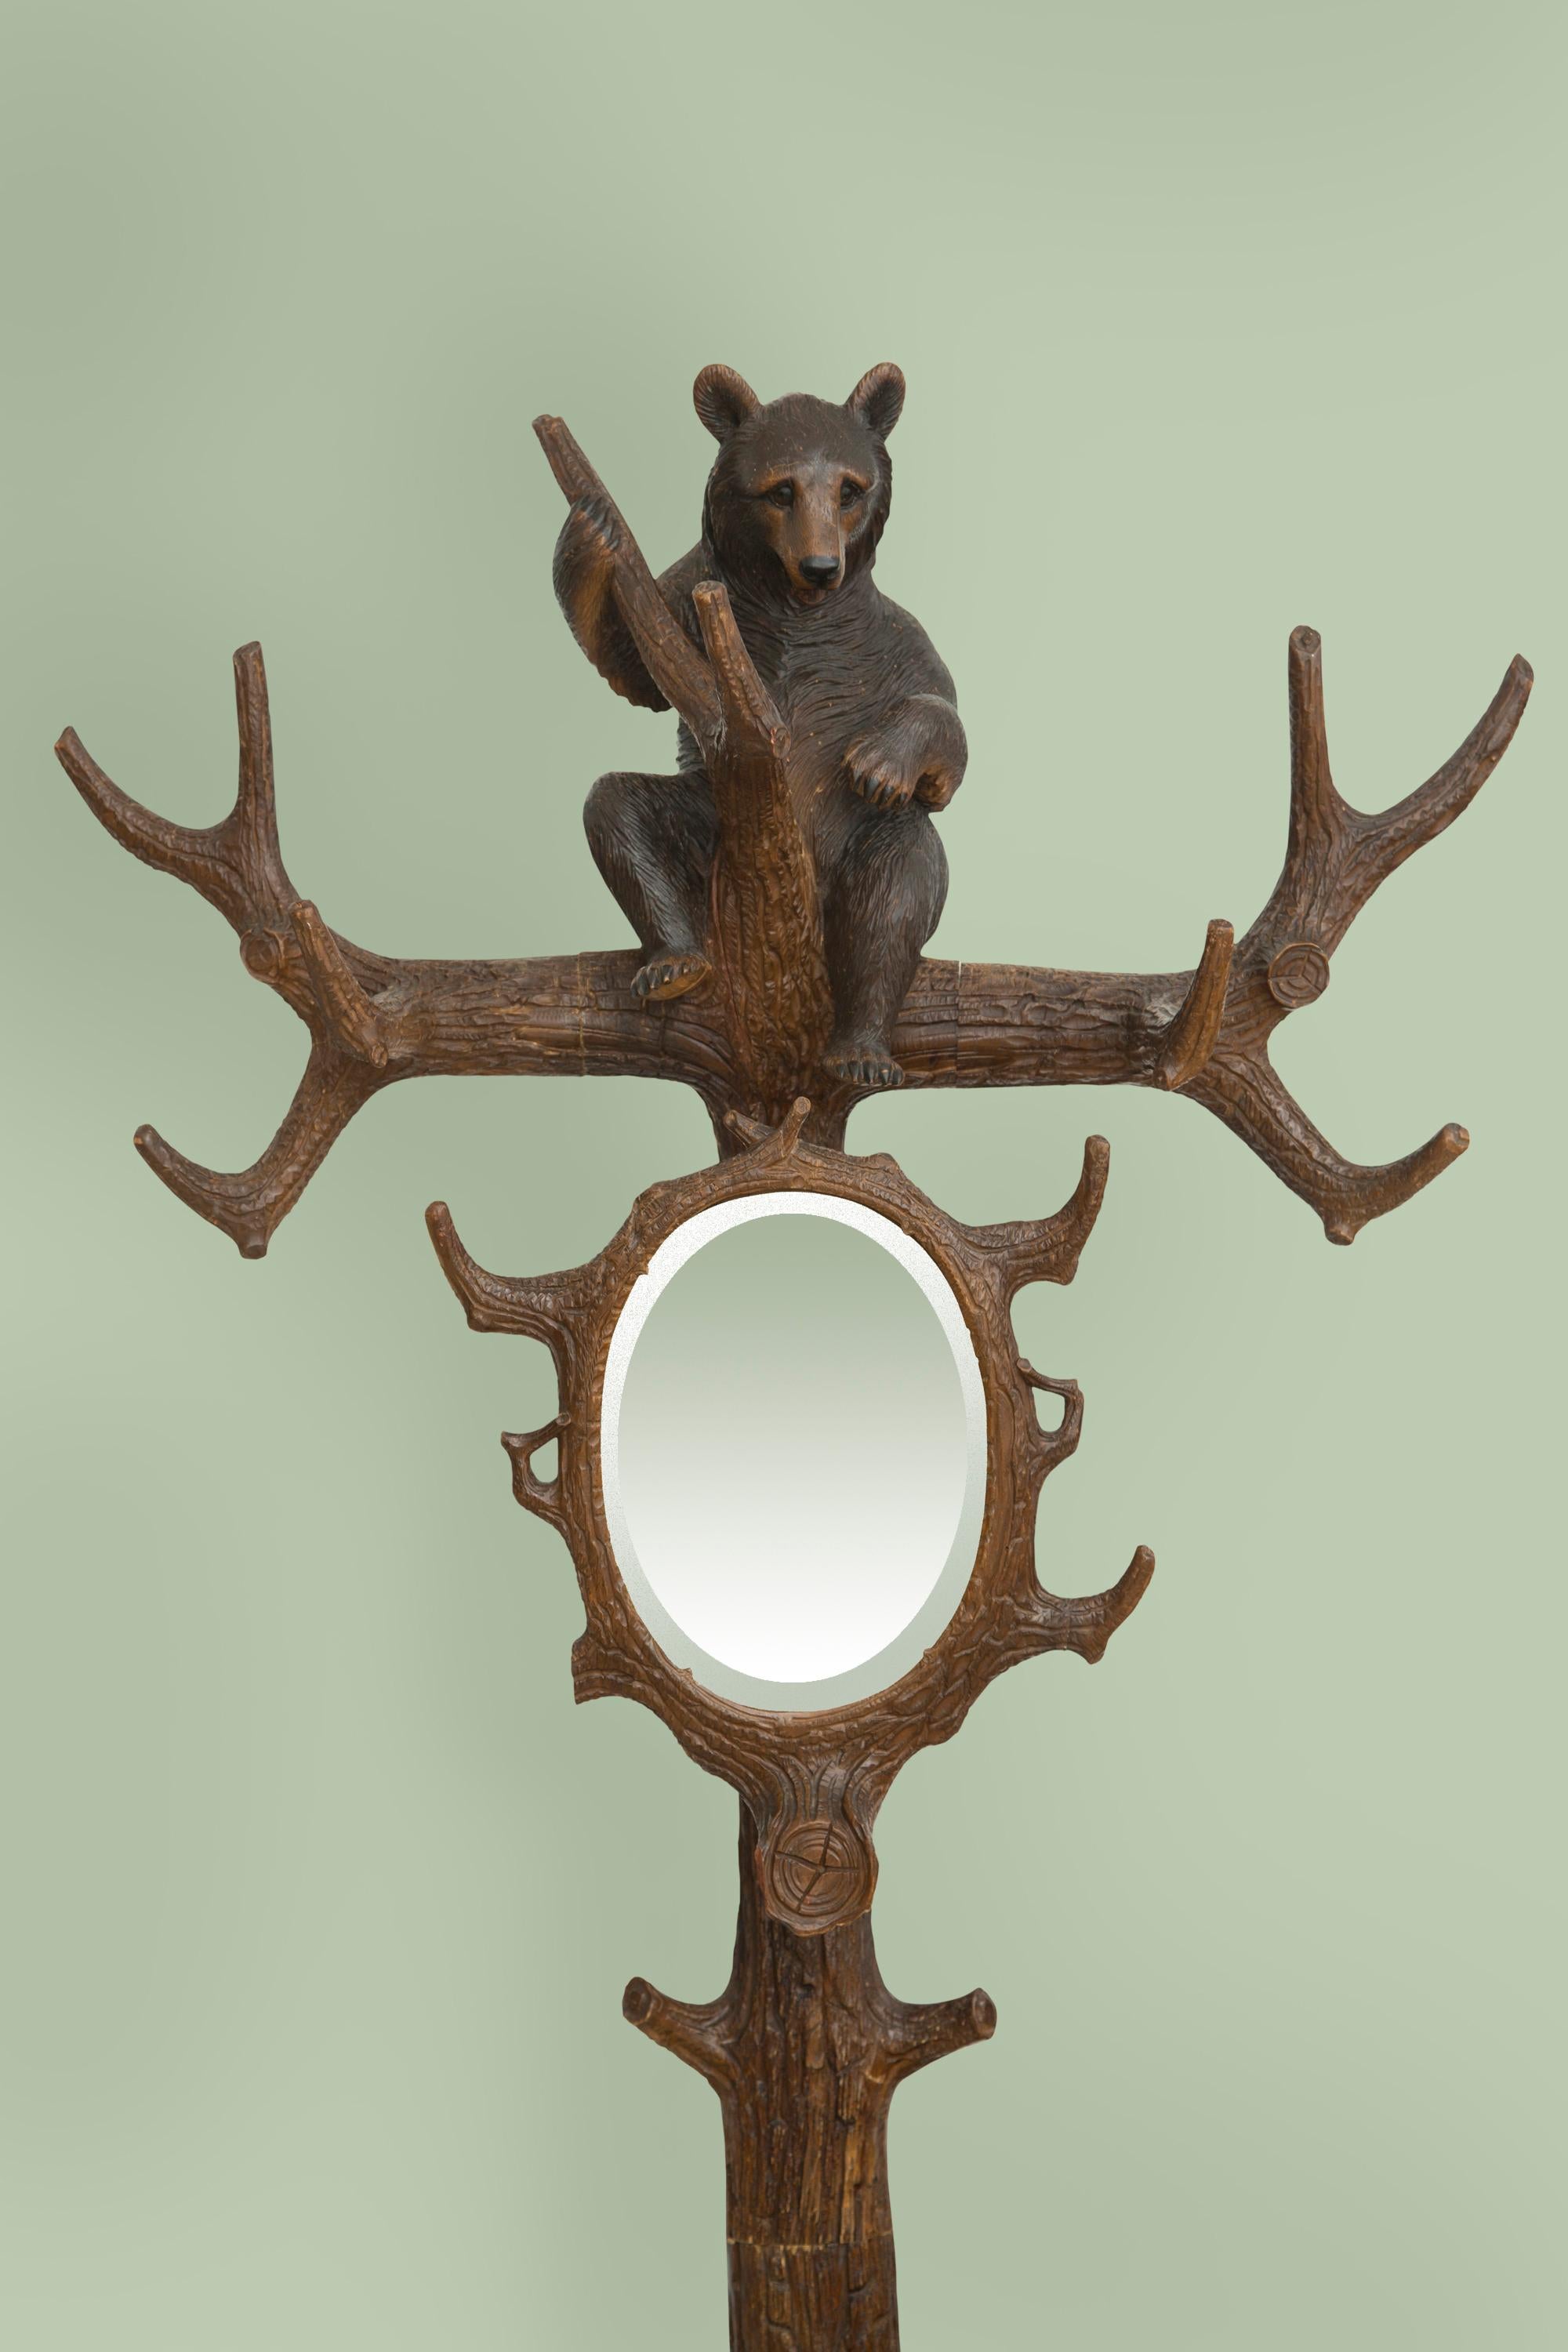 19th century Black Forest carved bears hall tree with umbrella stand and original beveled glass mirror. Finely detailed expert carving and glass eyes.